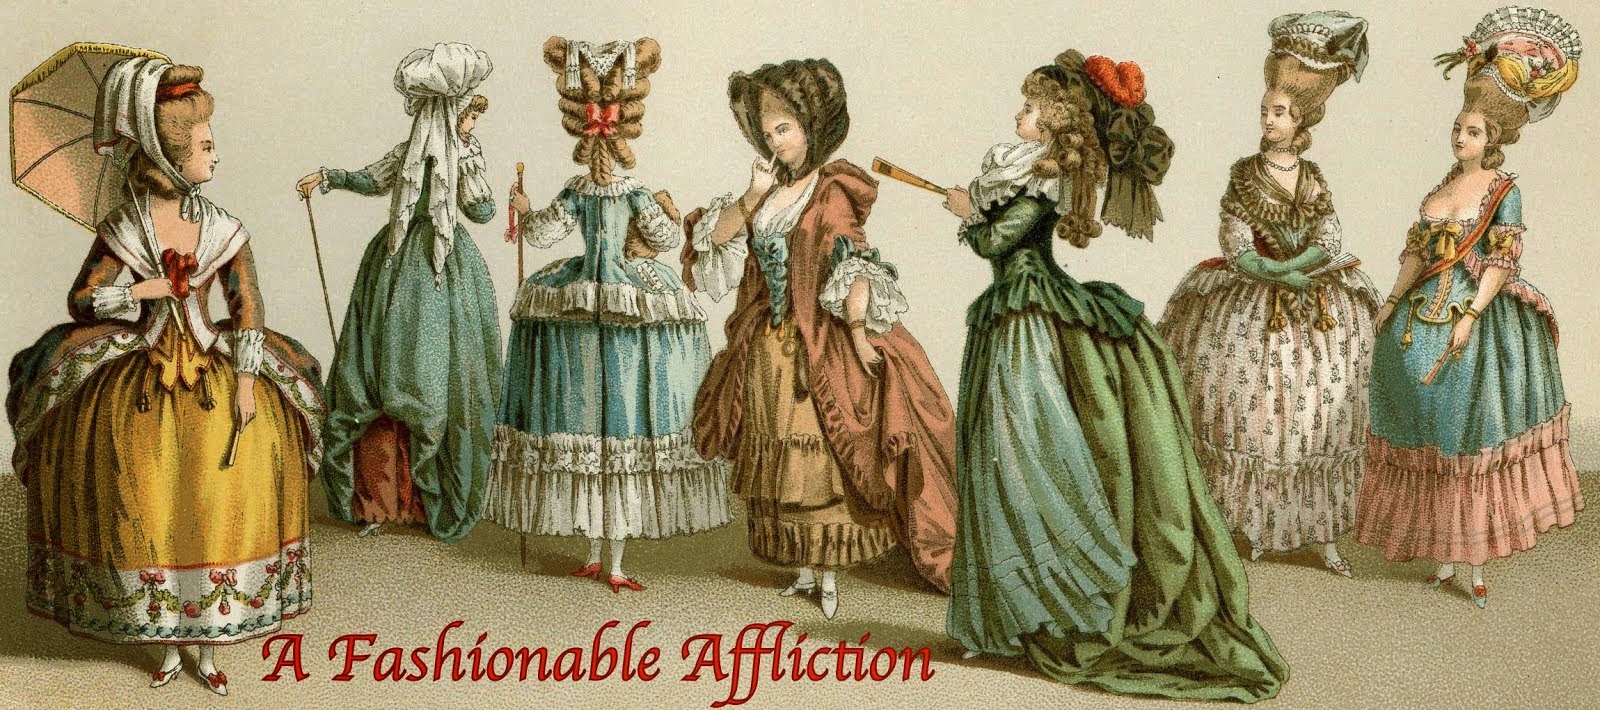 A Fashionable Affliction